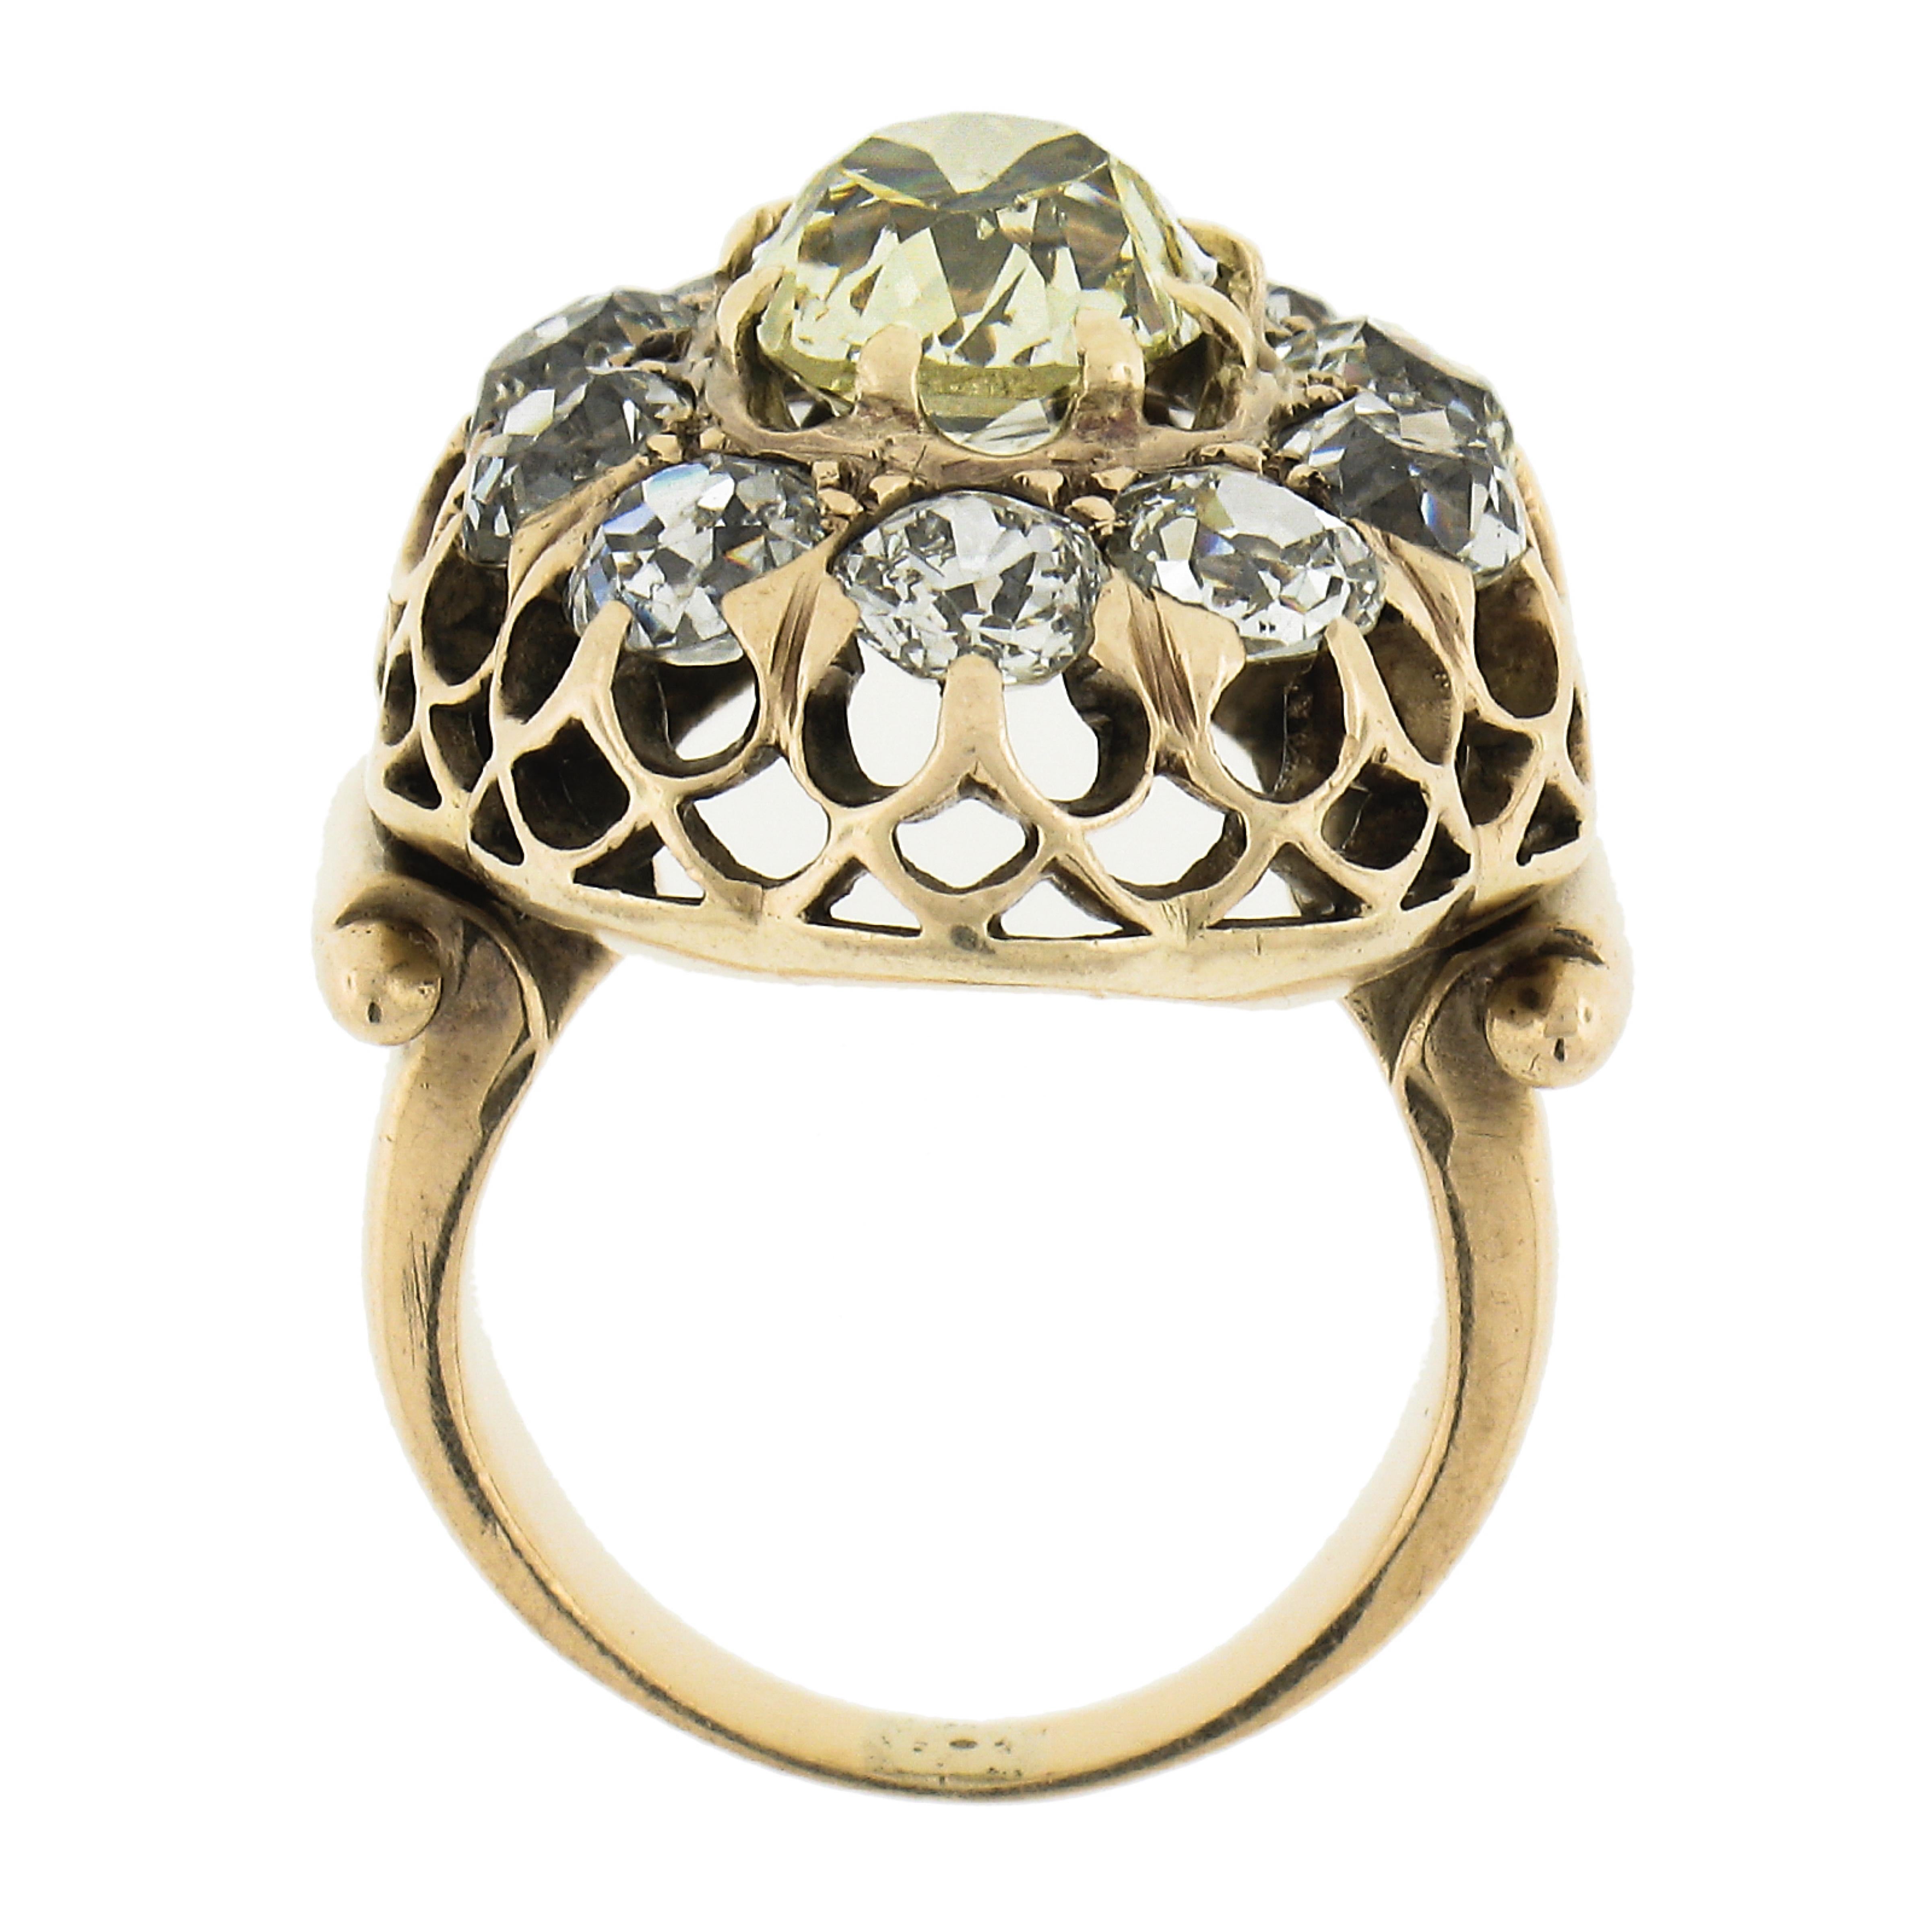 Antique Victorian 14K Gold 6.49ct GIA Fancy Intense Yellow Old Diamond Halo Ring For Sale 2